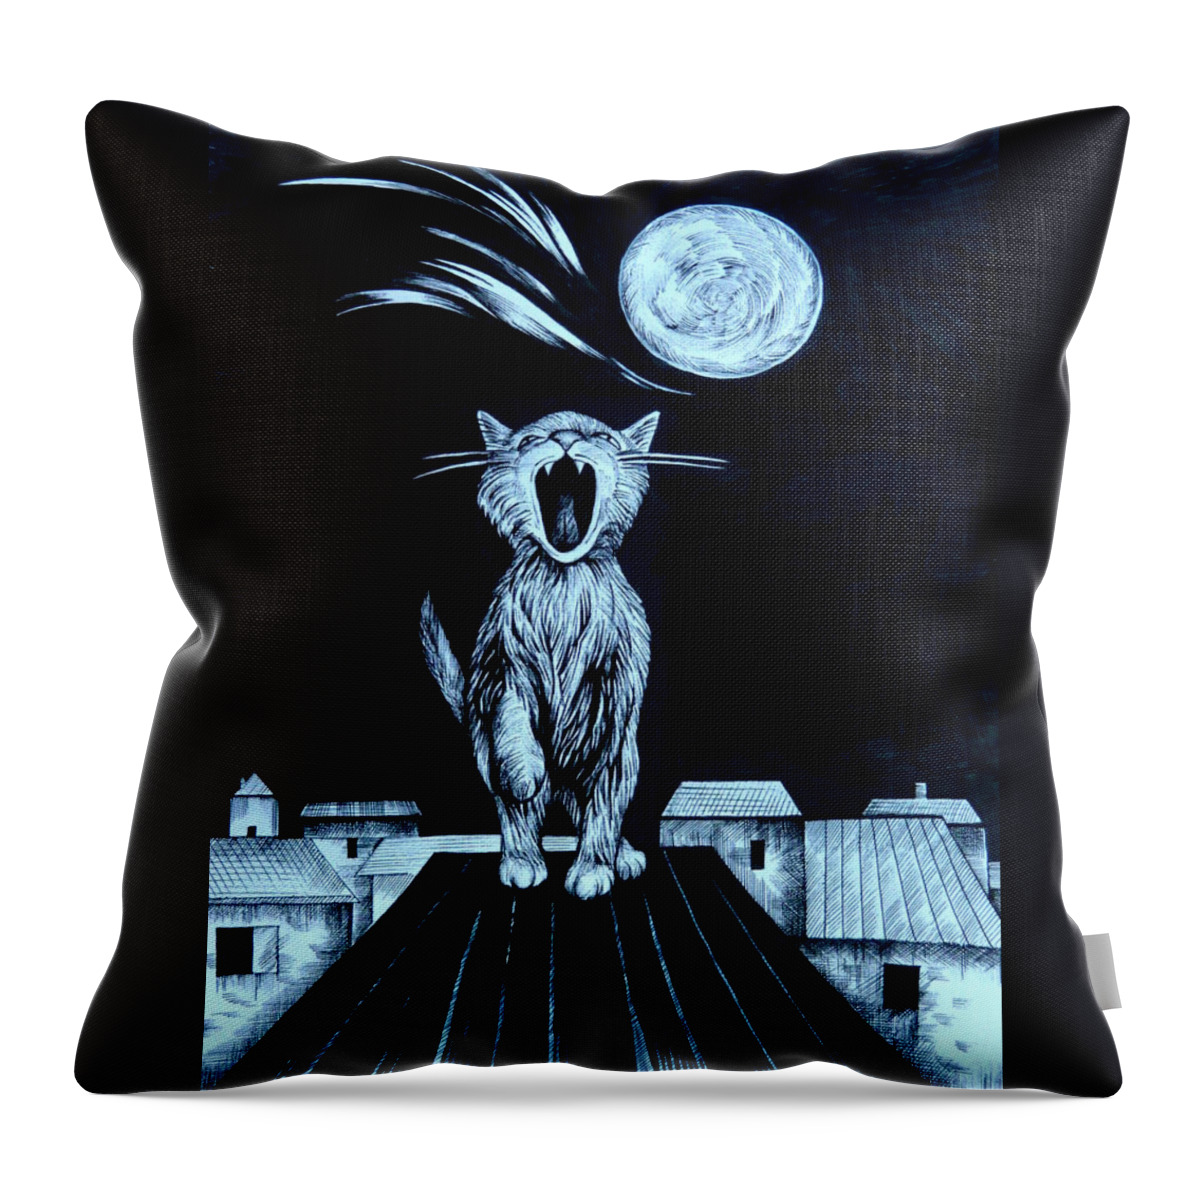 Pen And Ink Throw Pillow featuring the drawing Yeller by Anna Duyunova